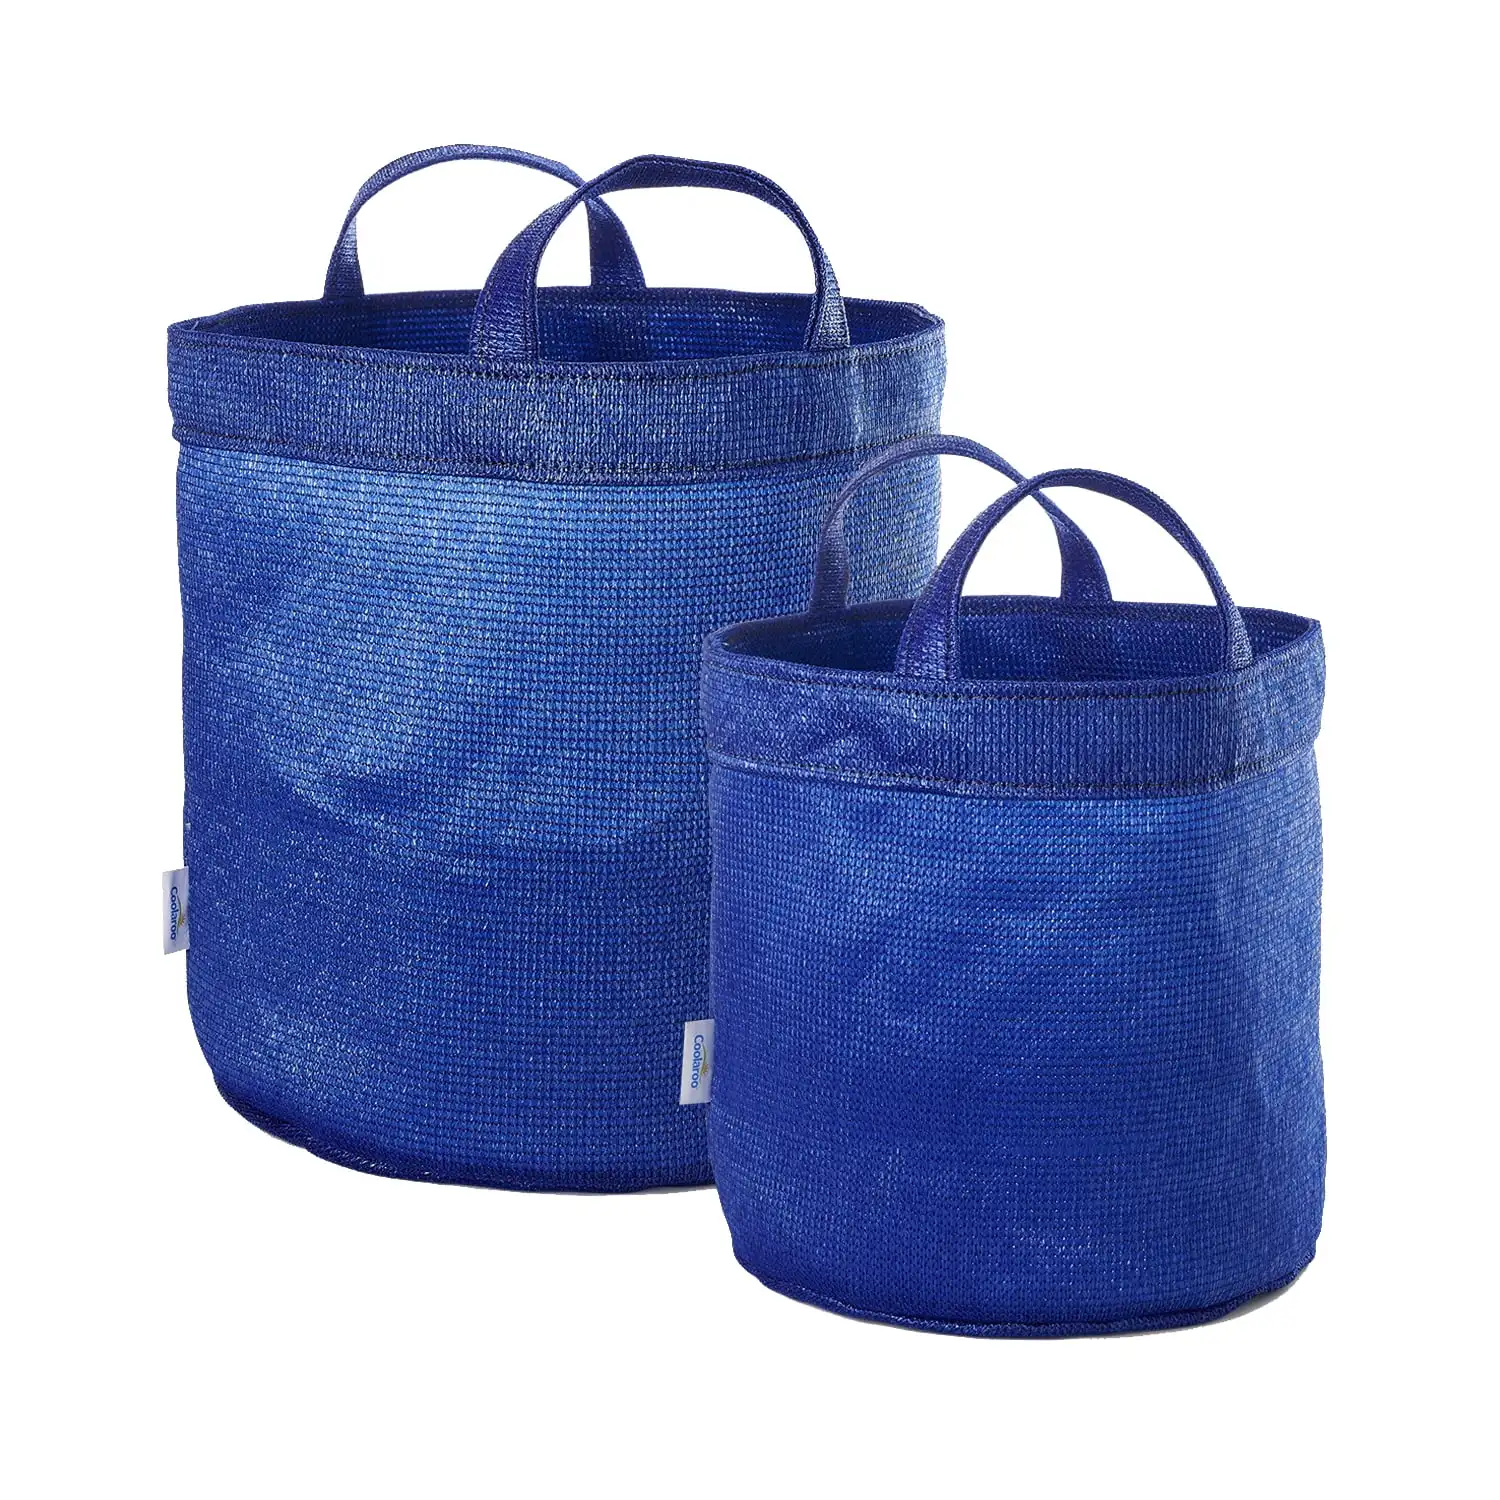 

Storage Toy Bin with Handles, 2 Pack Assorted Small & Medium Sizes, Aquatic Blue